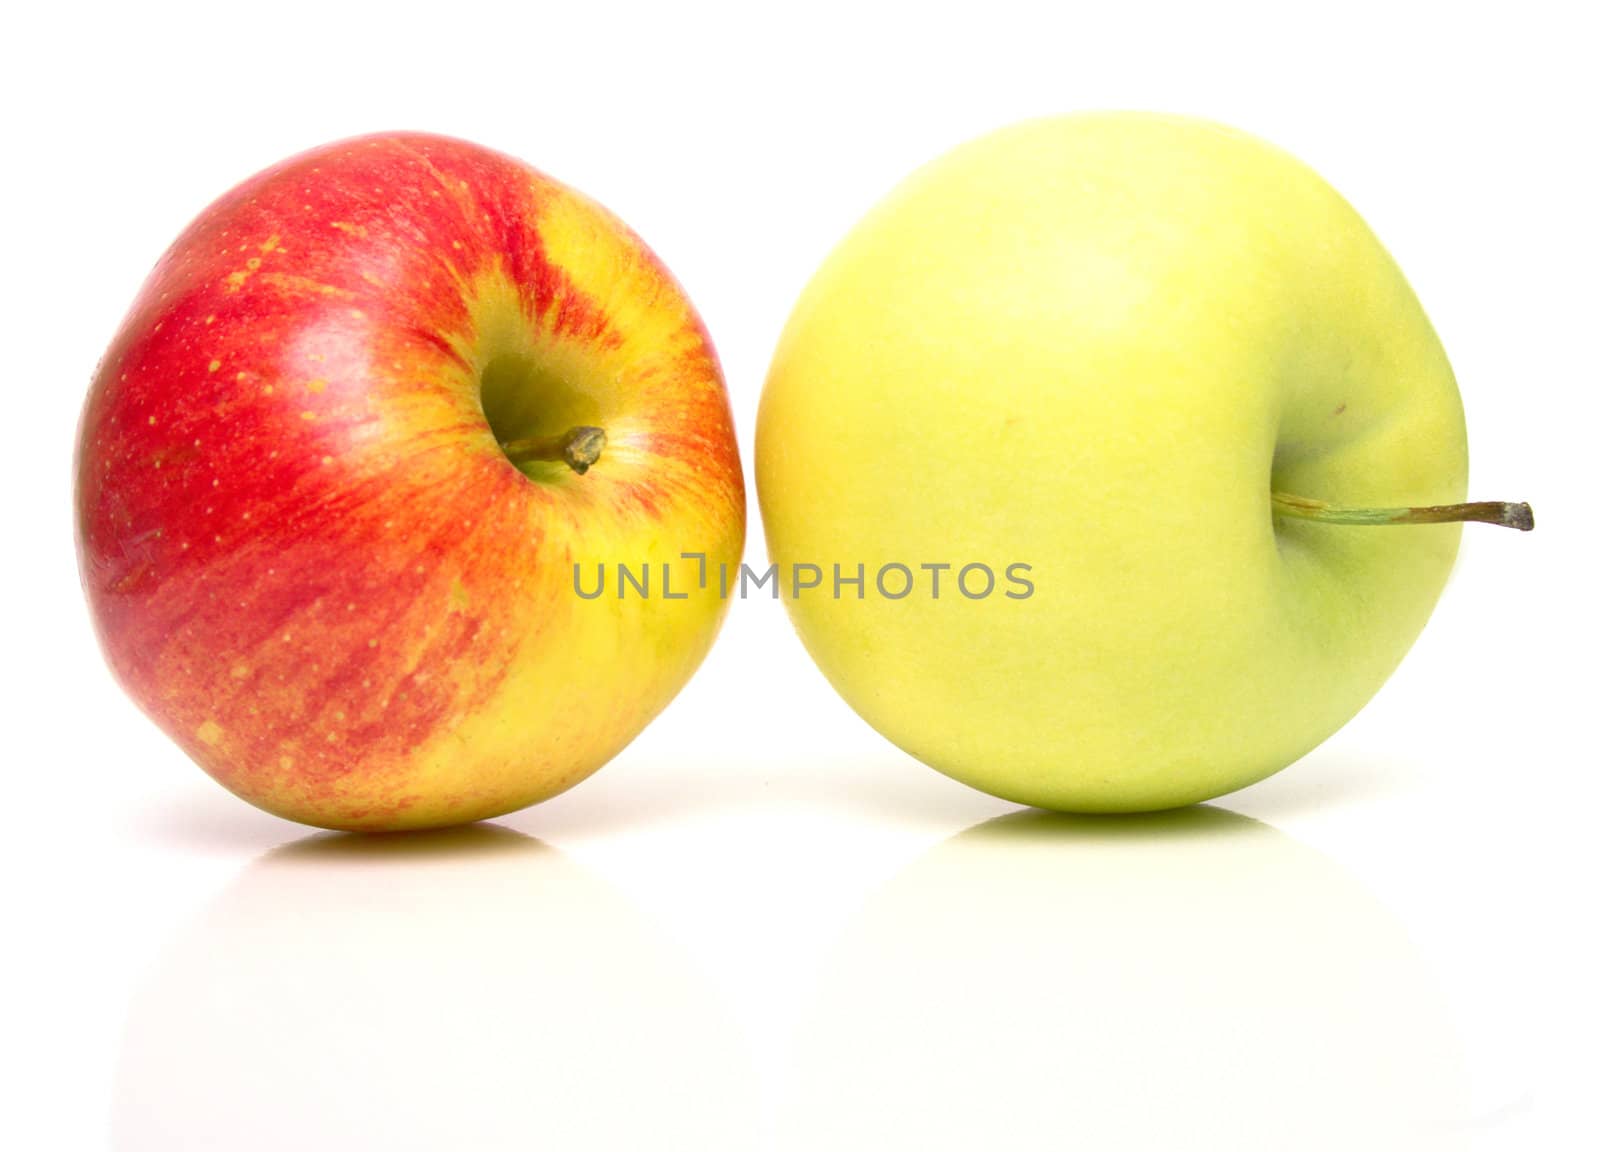 Red and yellow apples. Shallow DOF. Focus on a red apple.